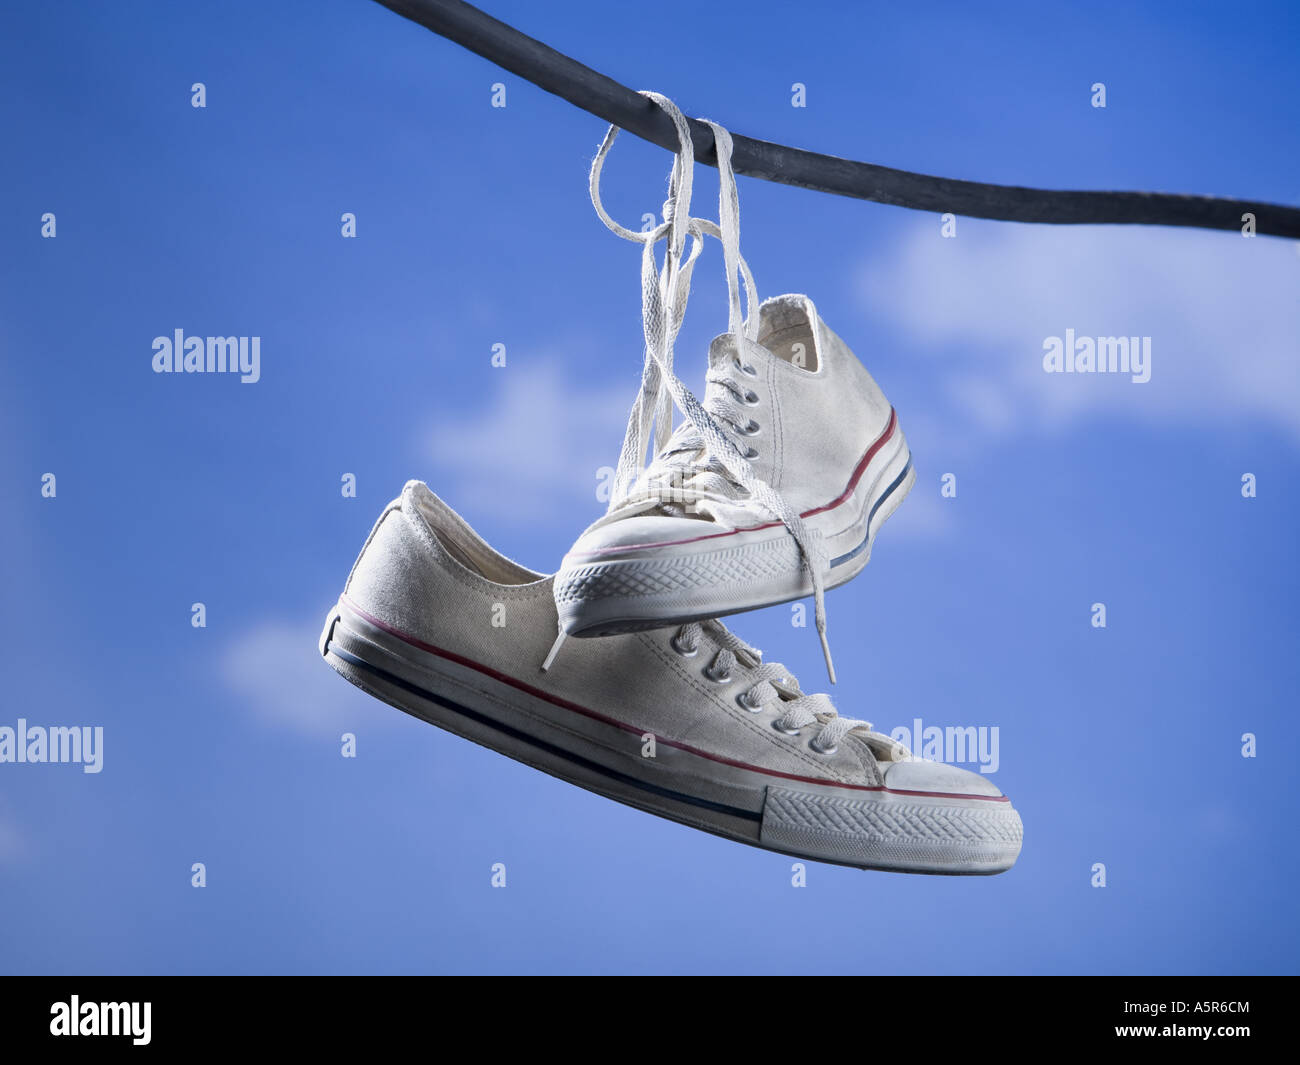 Running shoes hanging on wire outdoors with blue sky Stock Photo - Alamy